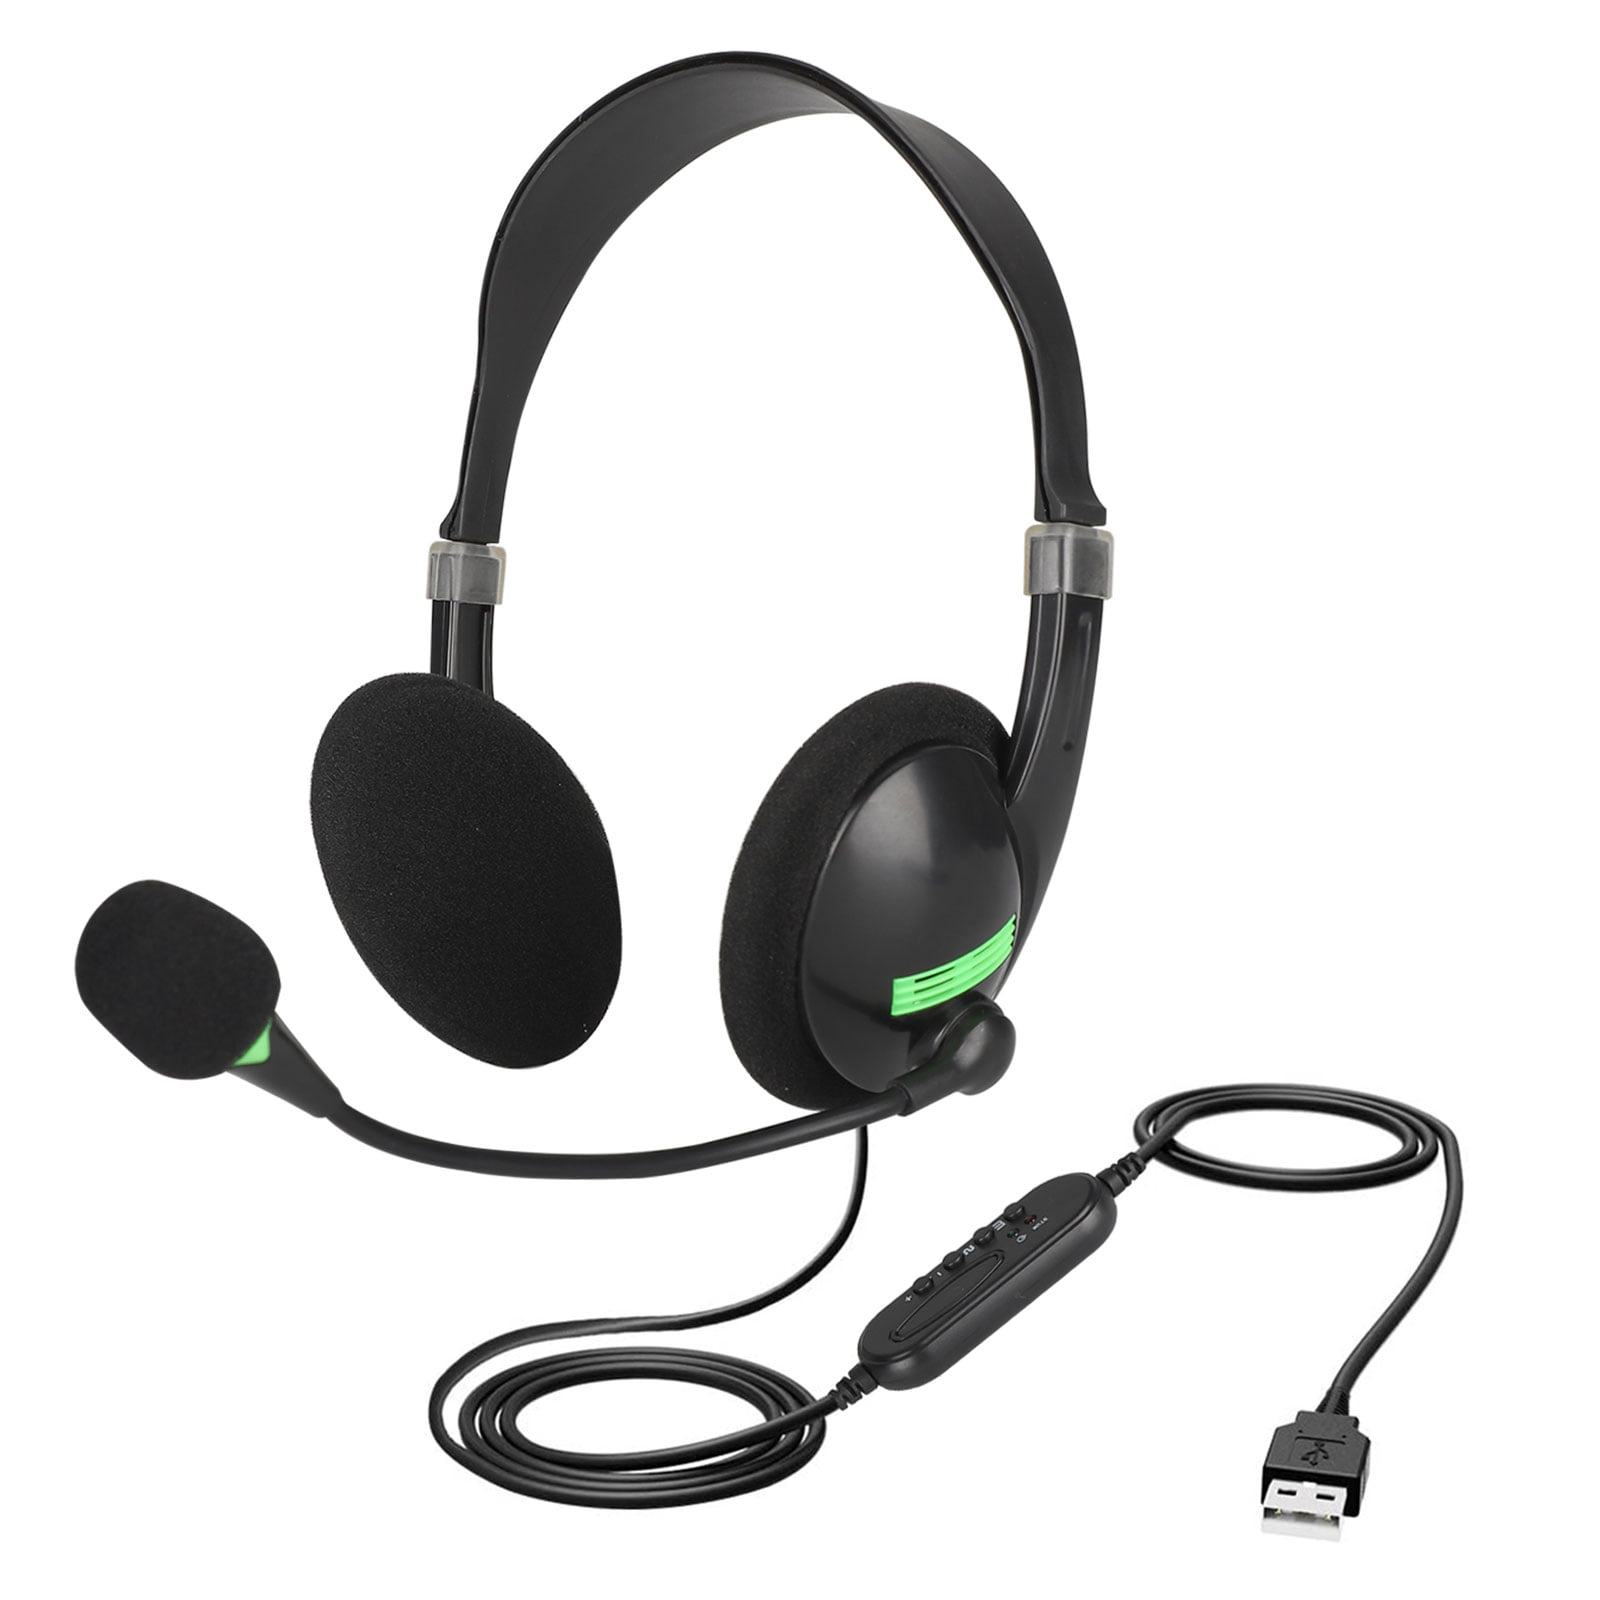 USB Headset with Microphone, OverTheHead Computer